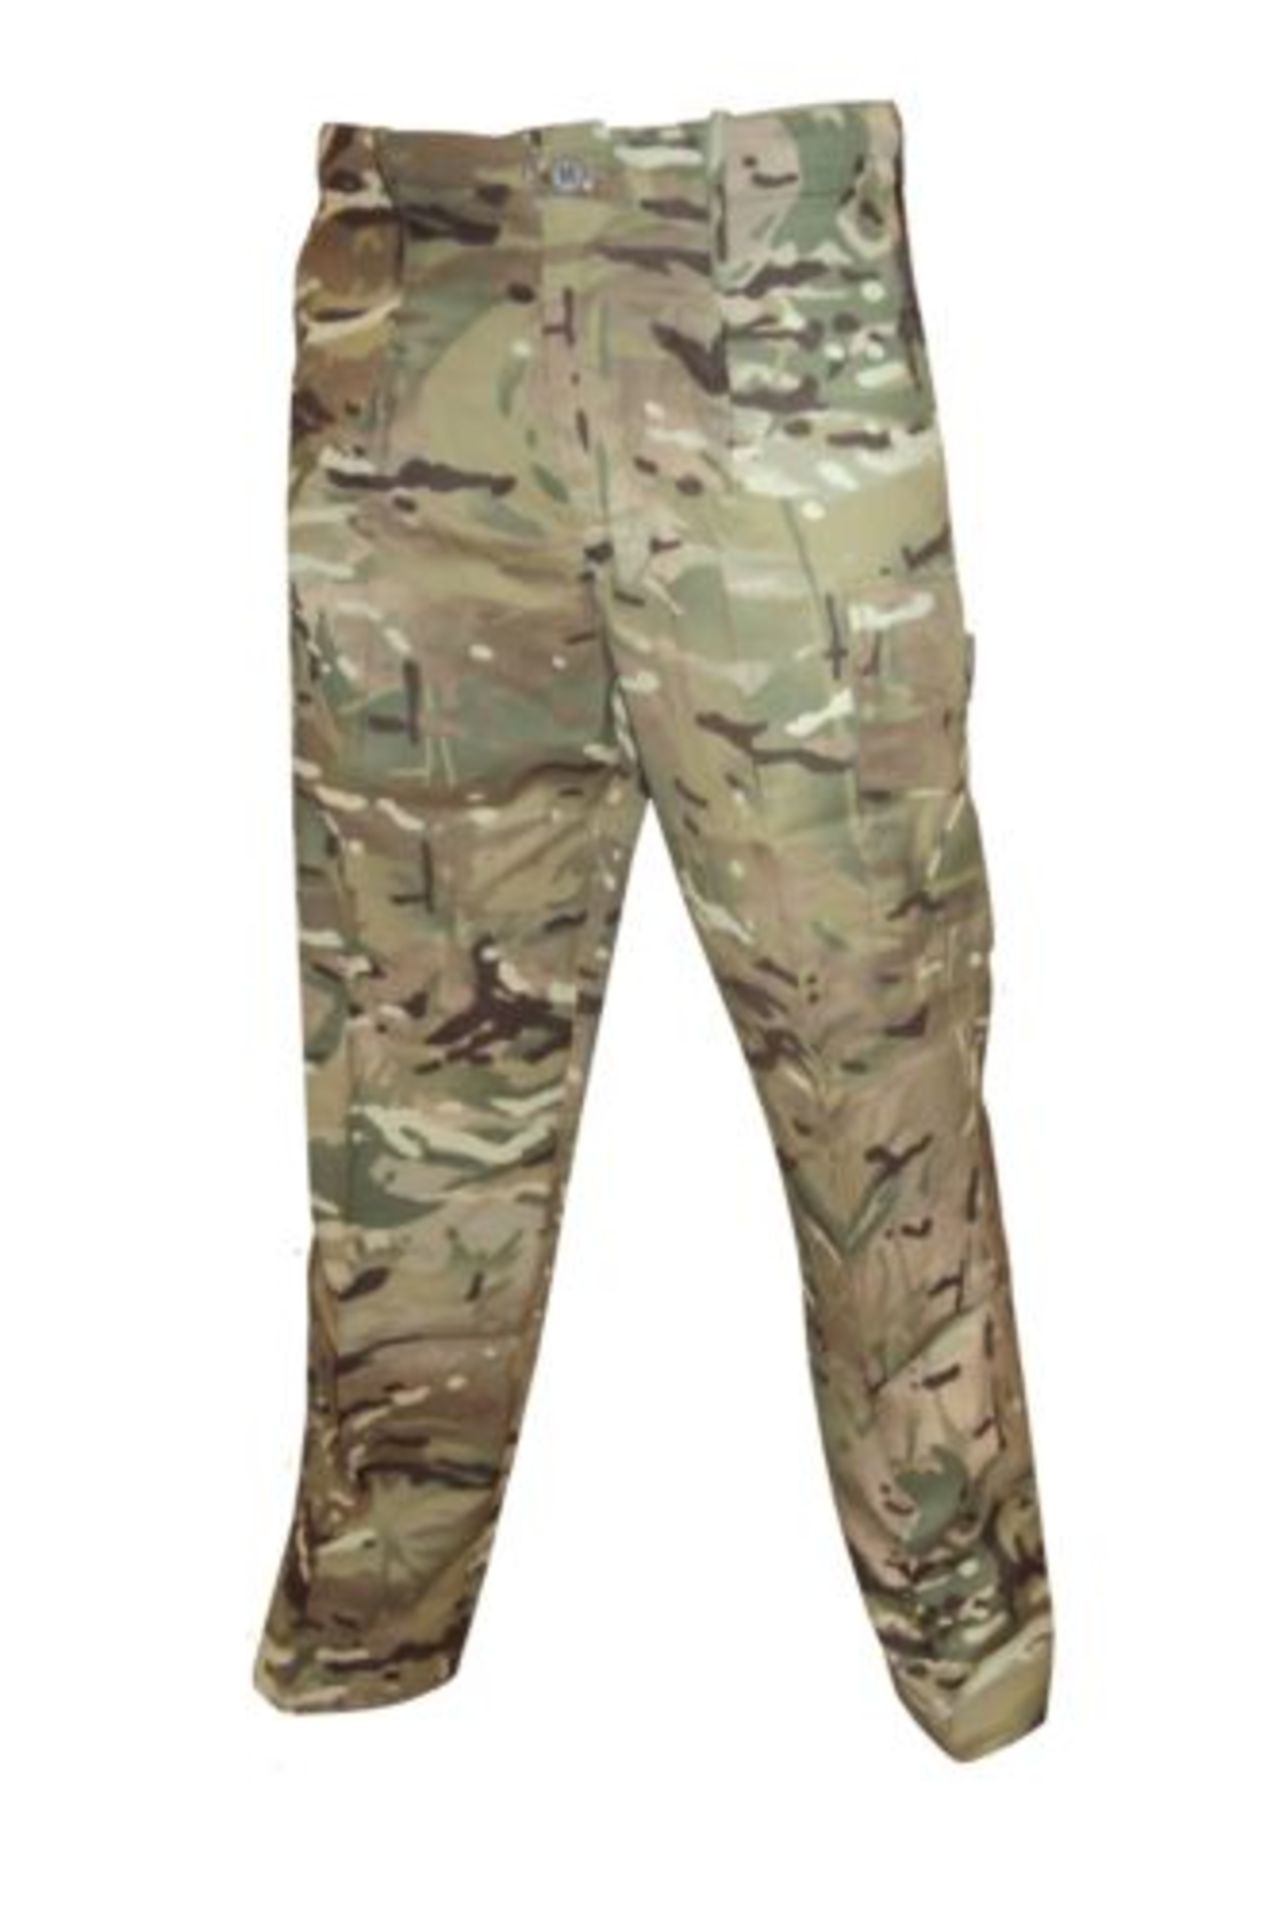 Pack of 10 - MTP Trousers - Grade 1